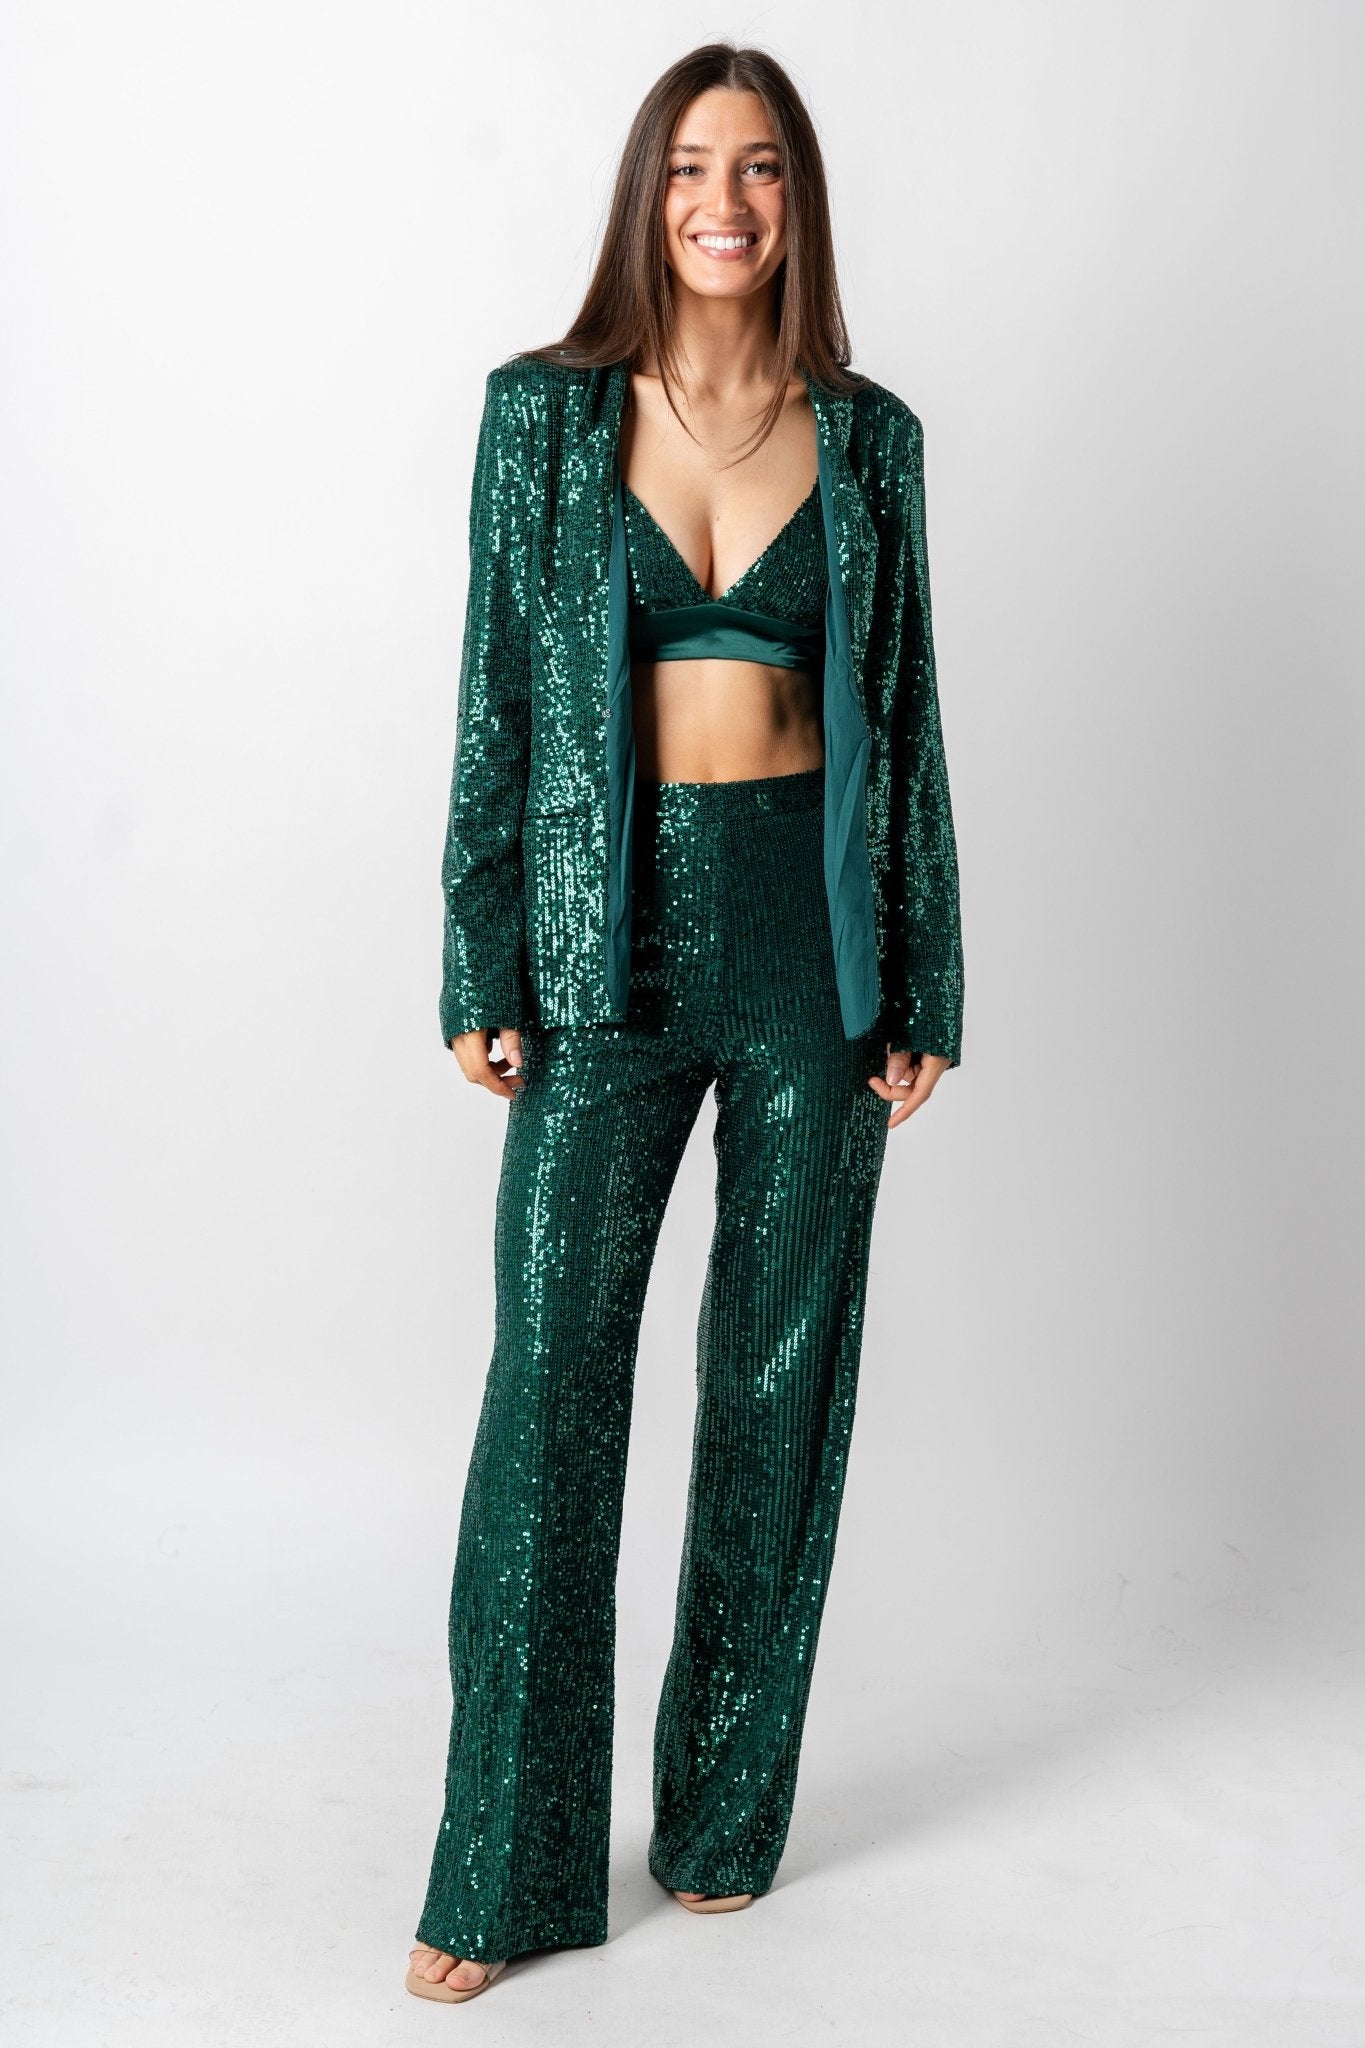 Sequin oversized blazer green – Fashionable Jackets | Trendy Blazers at Lush Fashion Lounge Boutique in Oklahoma City